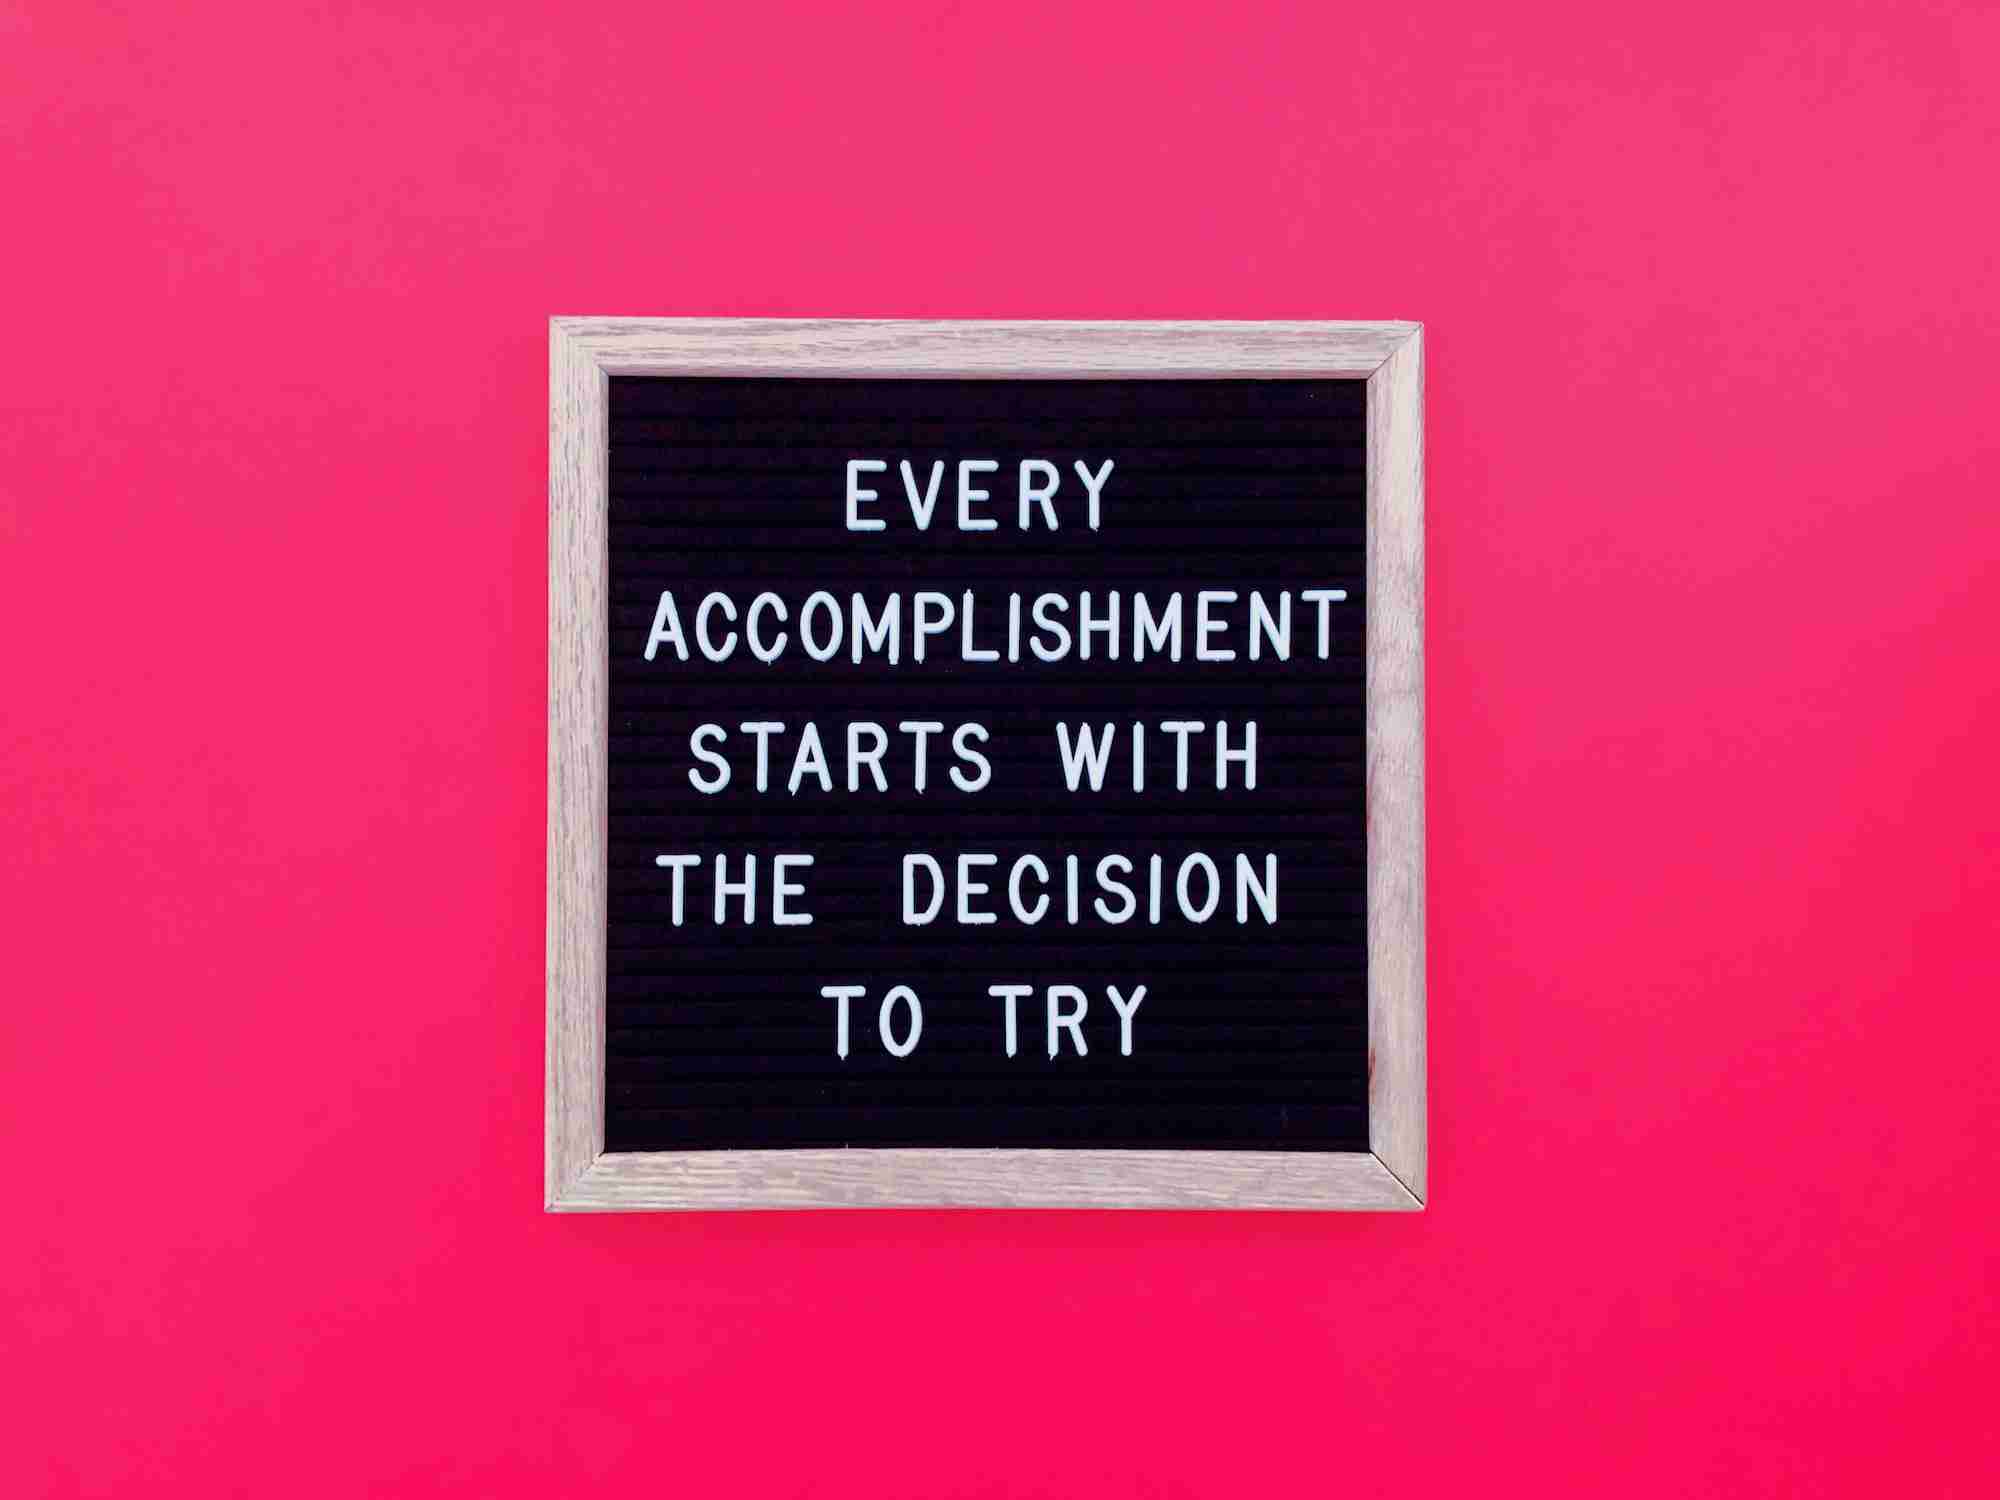 Every accomplishment starts with the decision to try